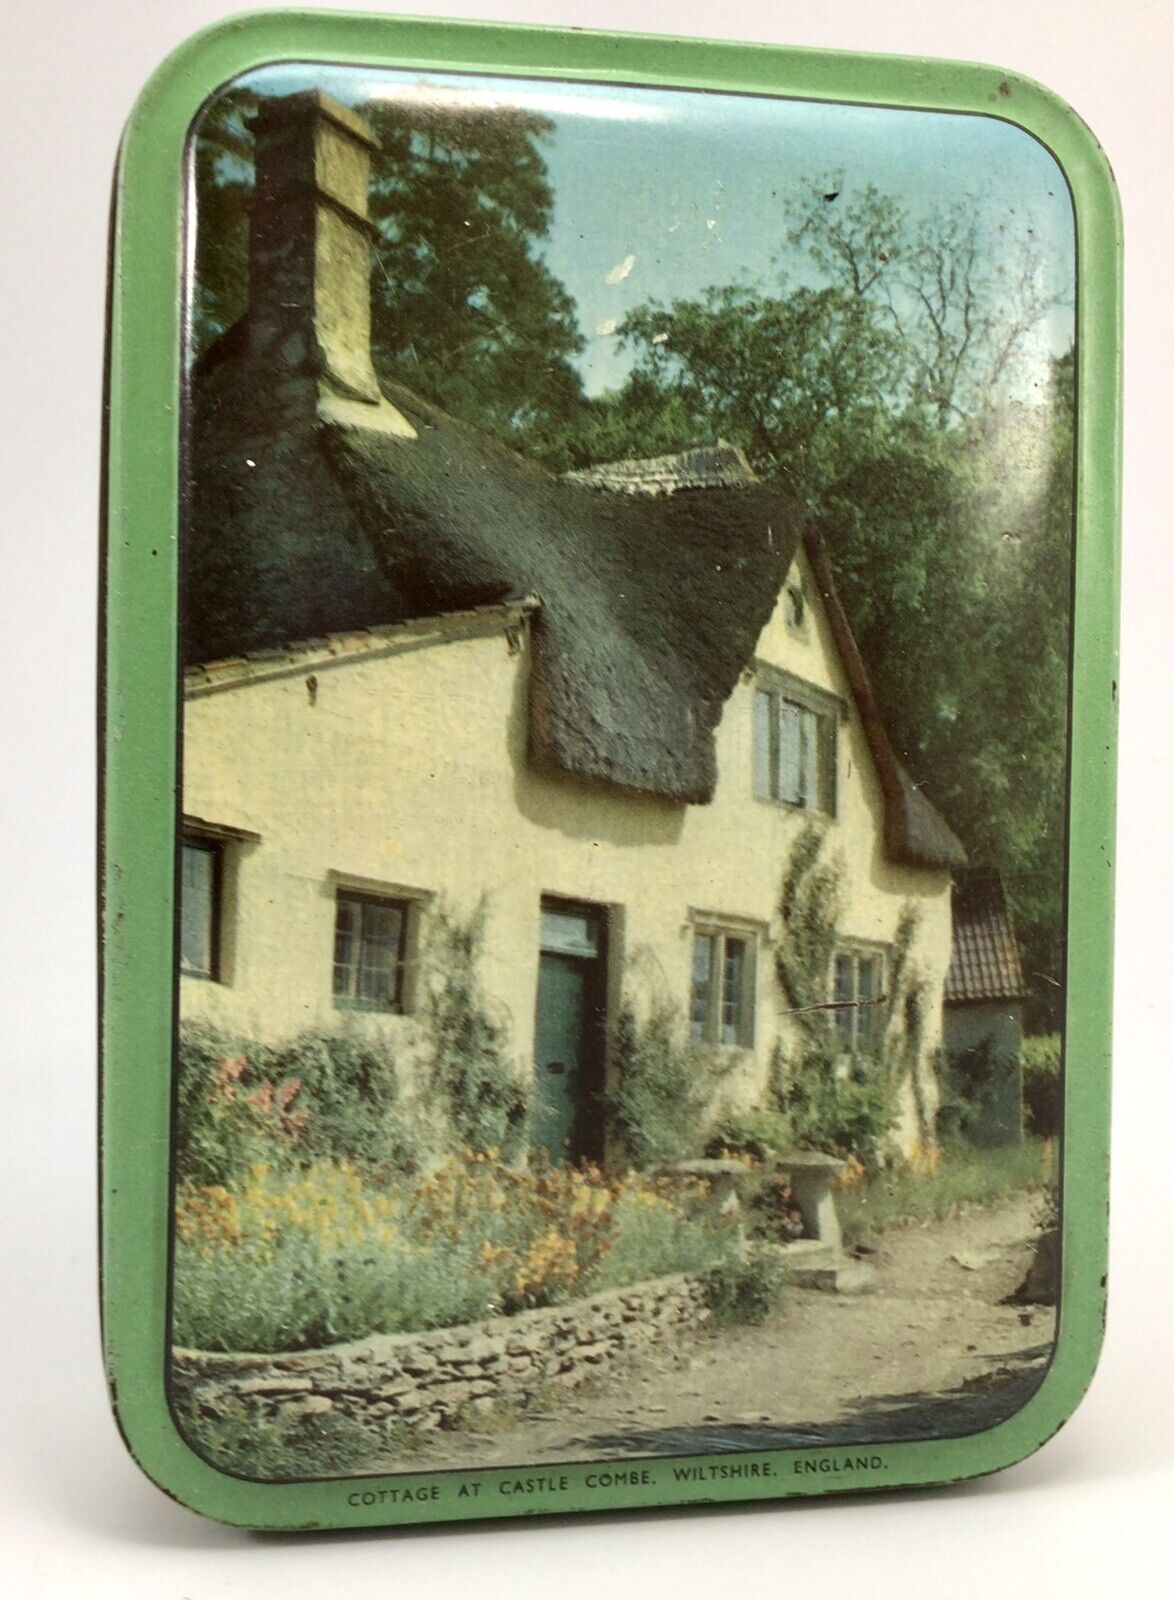 Vintage Pascall Candy Tin Container English Cottage at Castle Combe England